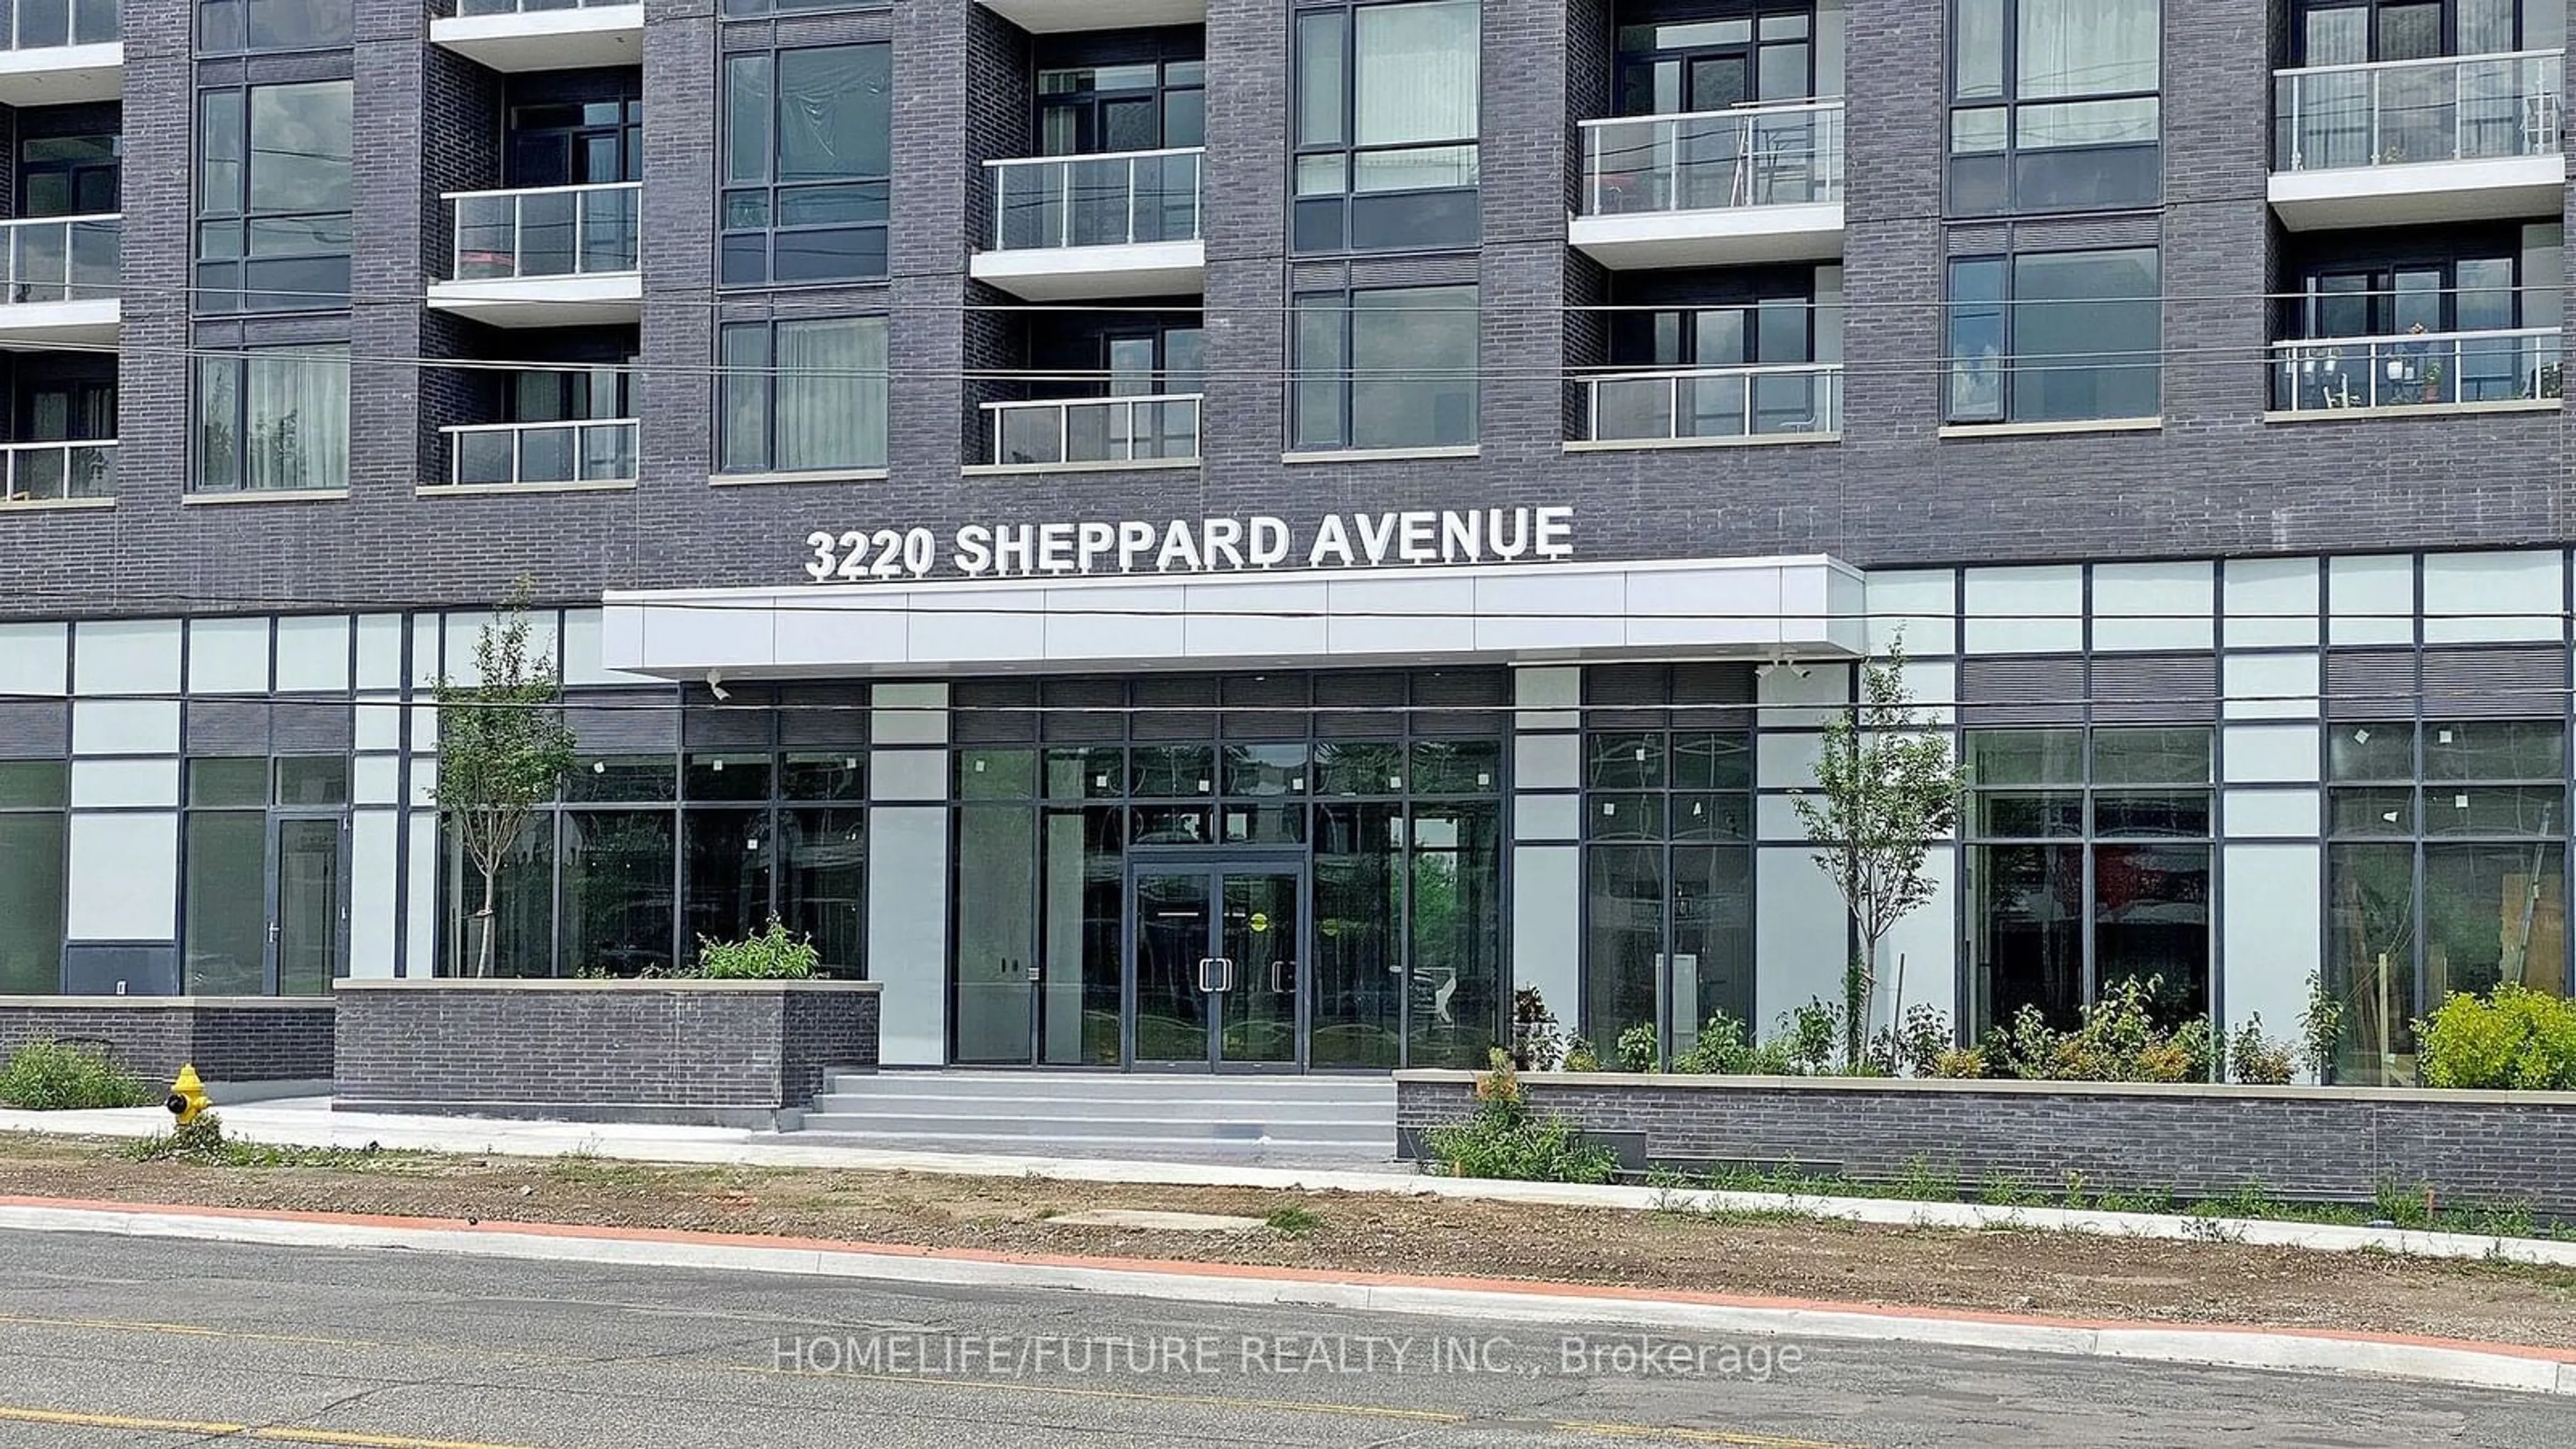 A pic from exterior of the house or condo for 3220 Sheppard Ave #221, Toronto Ontario M1T 3K3